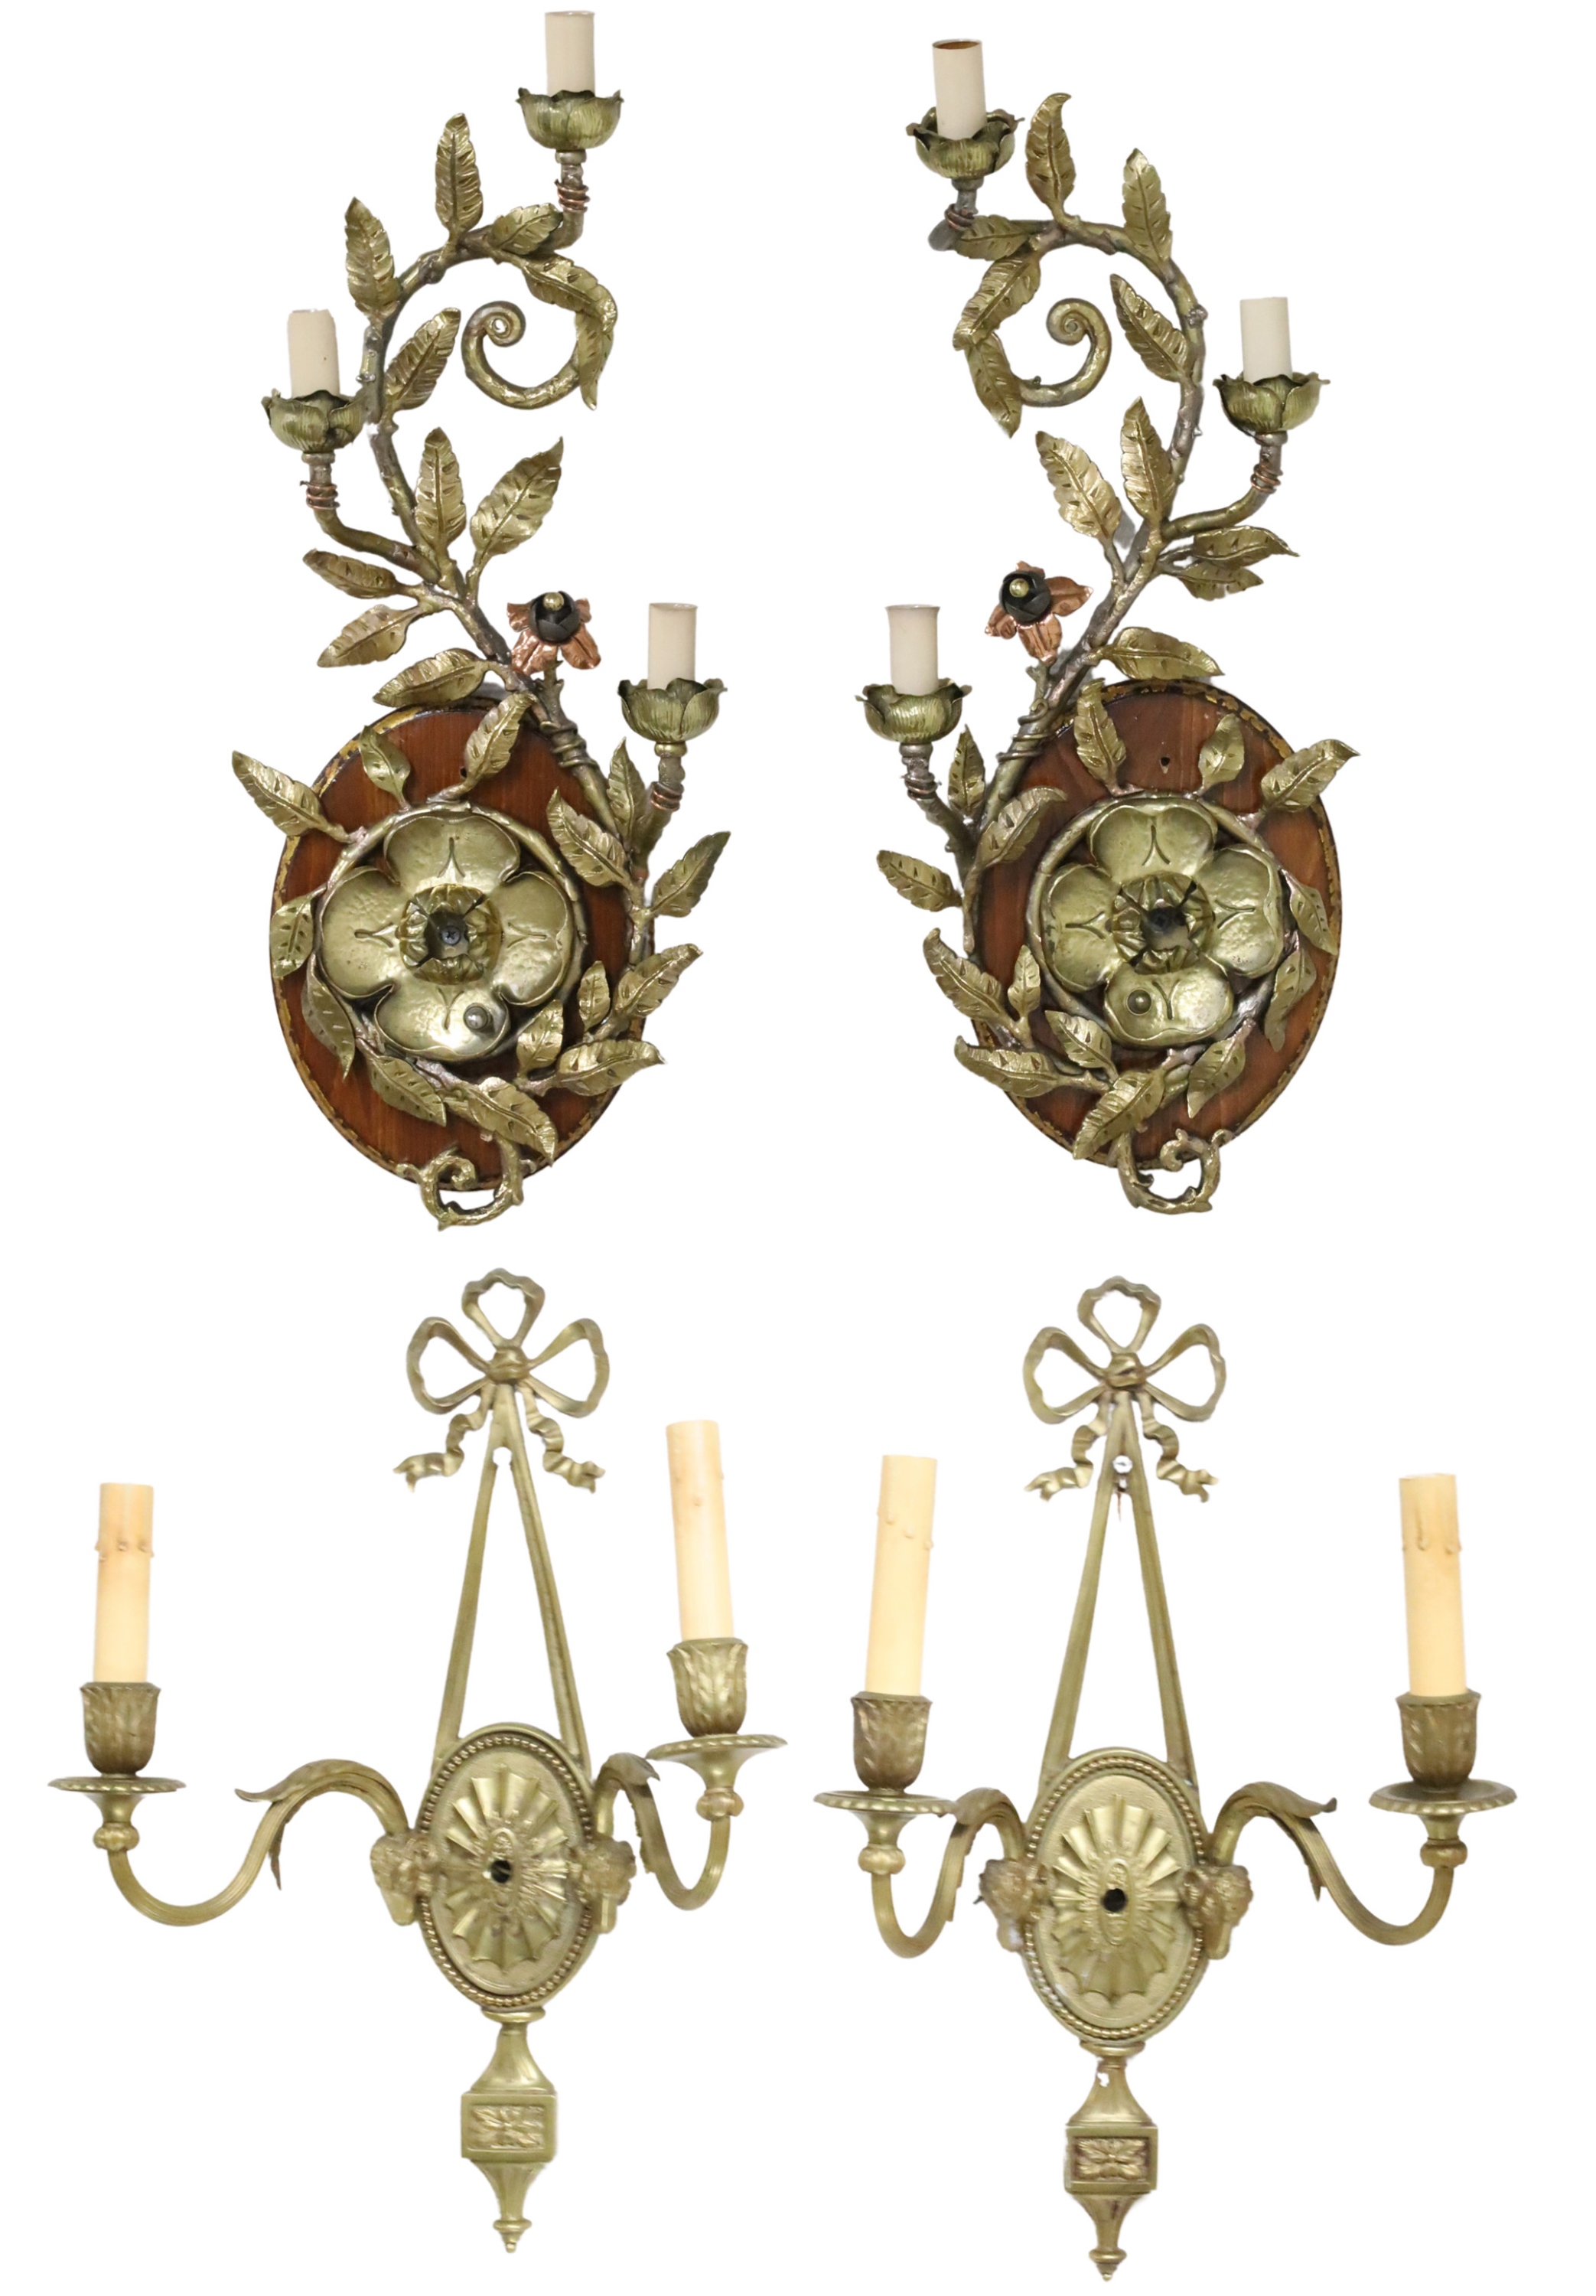 2 MISC. PRS. OF WALL SCONCES 2